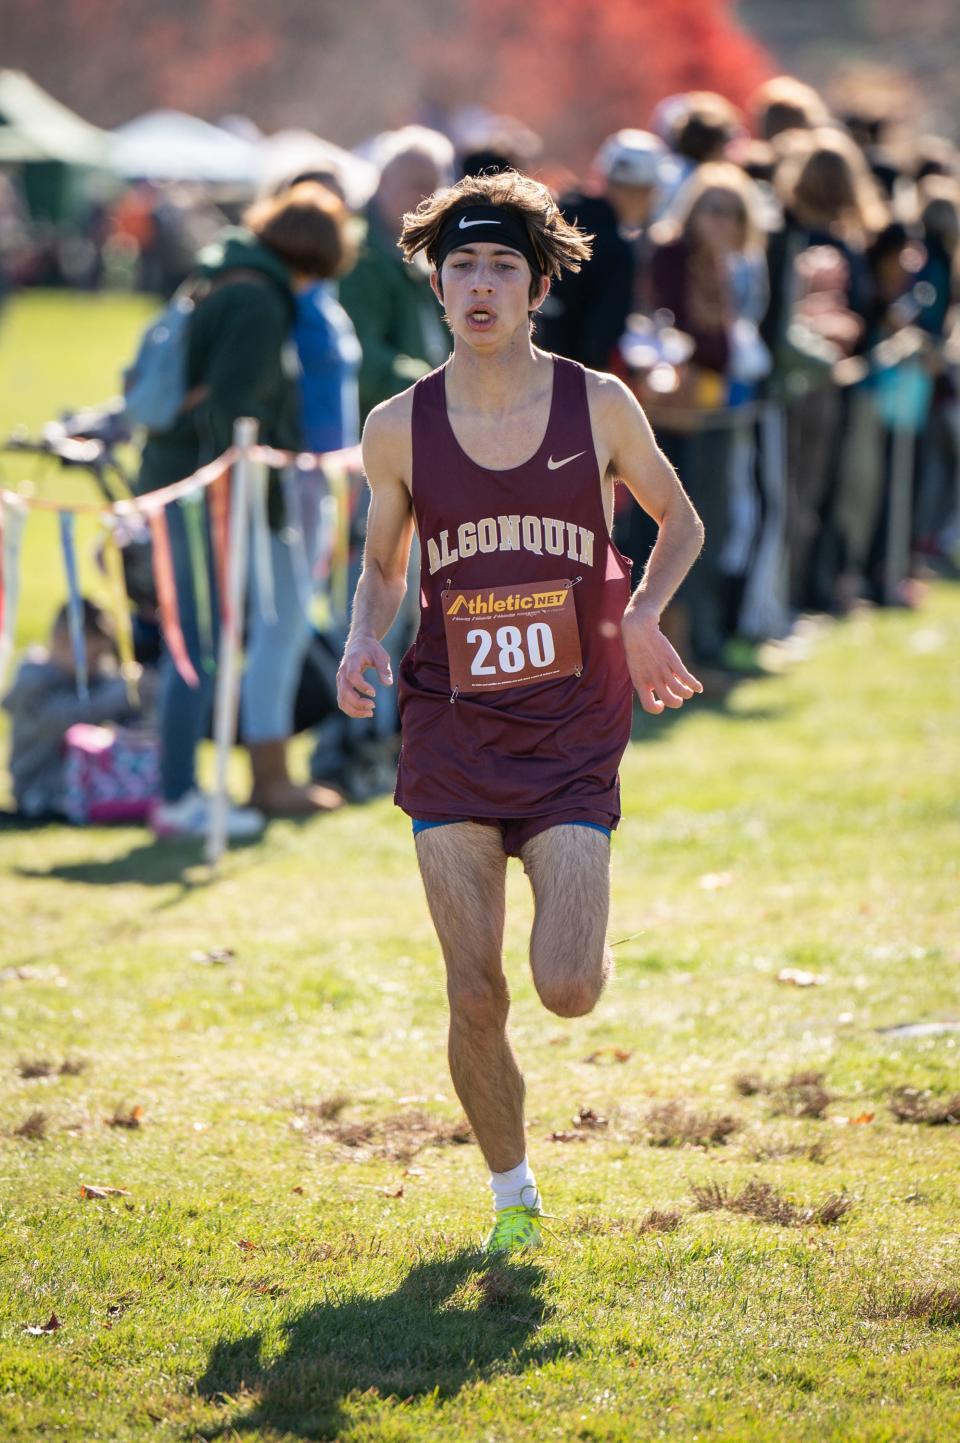 Algonquin's Steve White takes fourth in the Division 1 boys' race at the Central Mass. XC Championships at Gardner Municipal Golf Course.